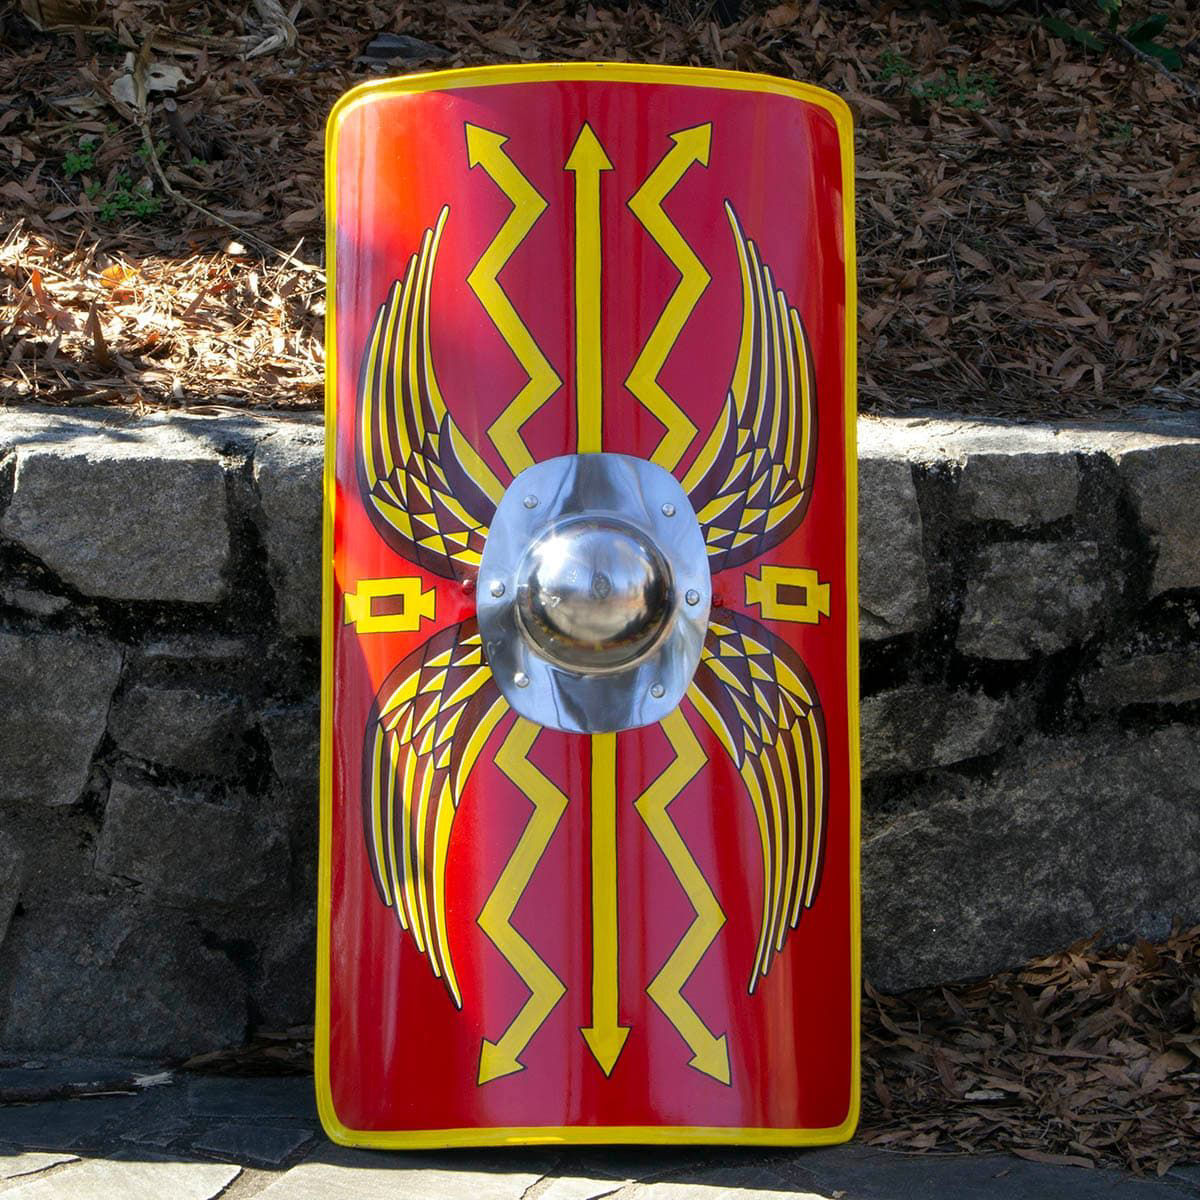 18 gauge steel Roman Scutum shield is hand-painted with eagle wings and thunderbolts has polished steel boss and steel handle